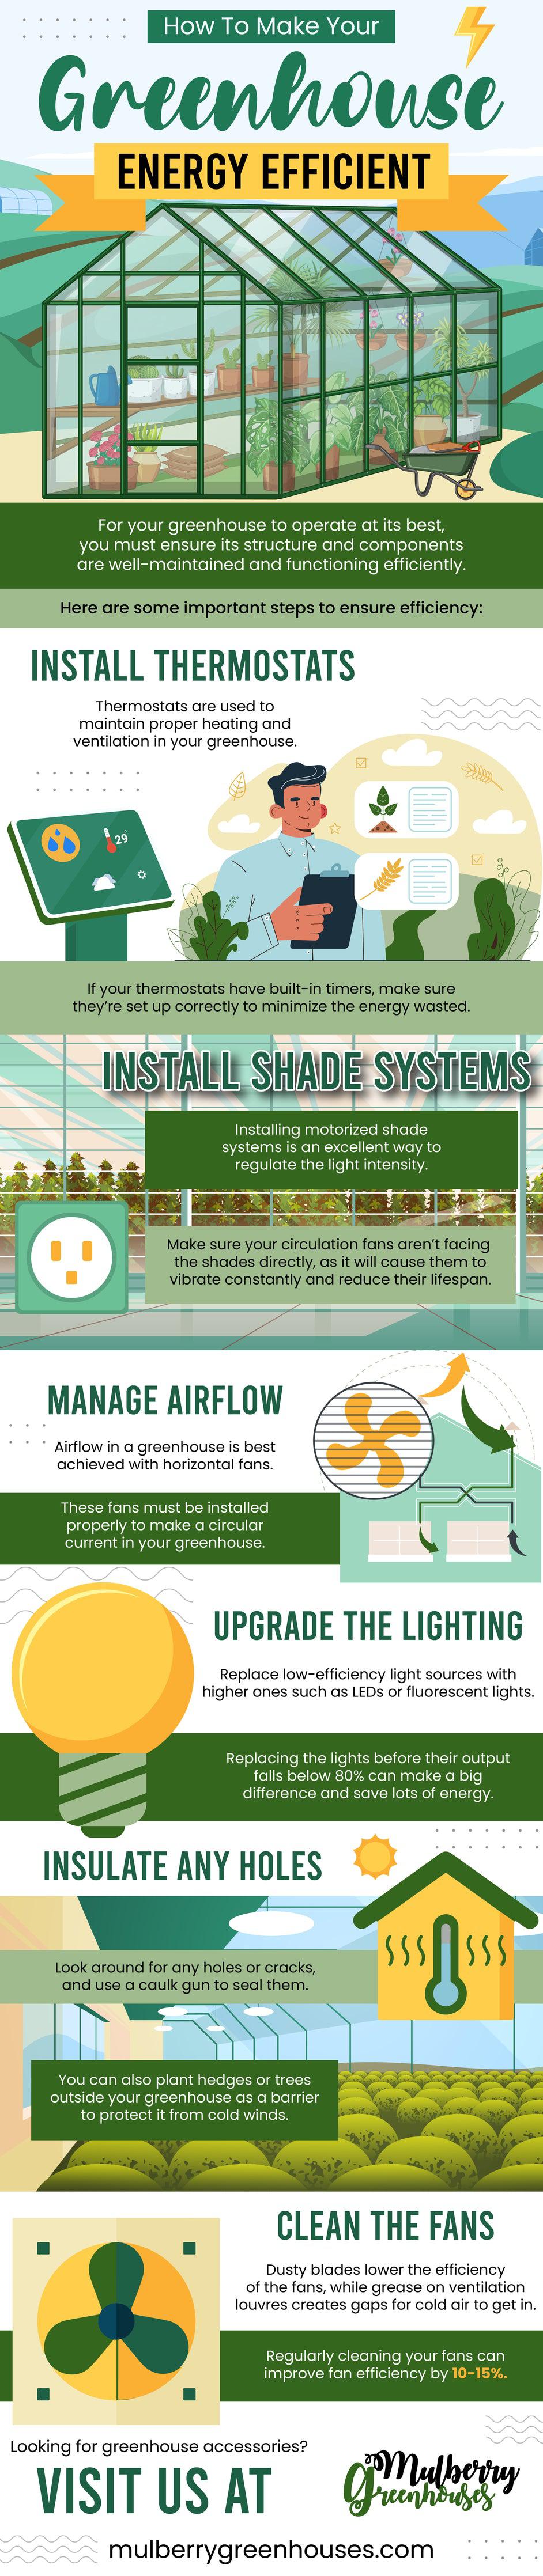 How To Make Your Greenhouse Energy Efficient - Infograph